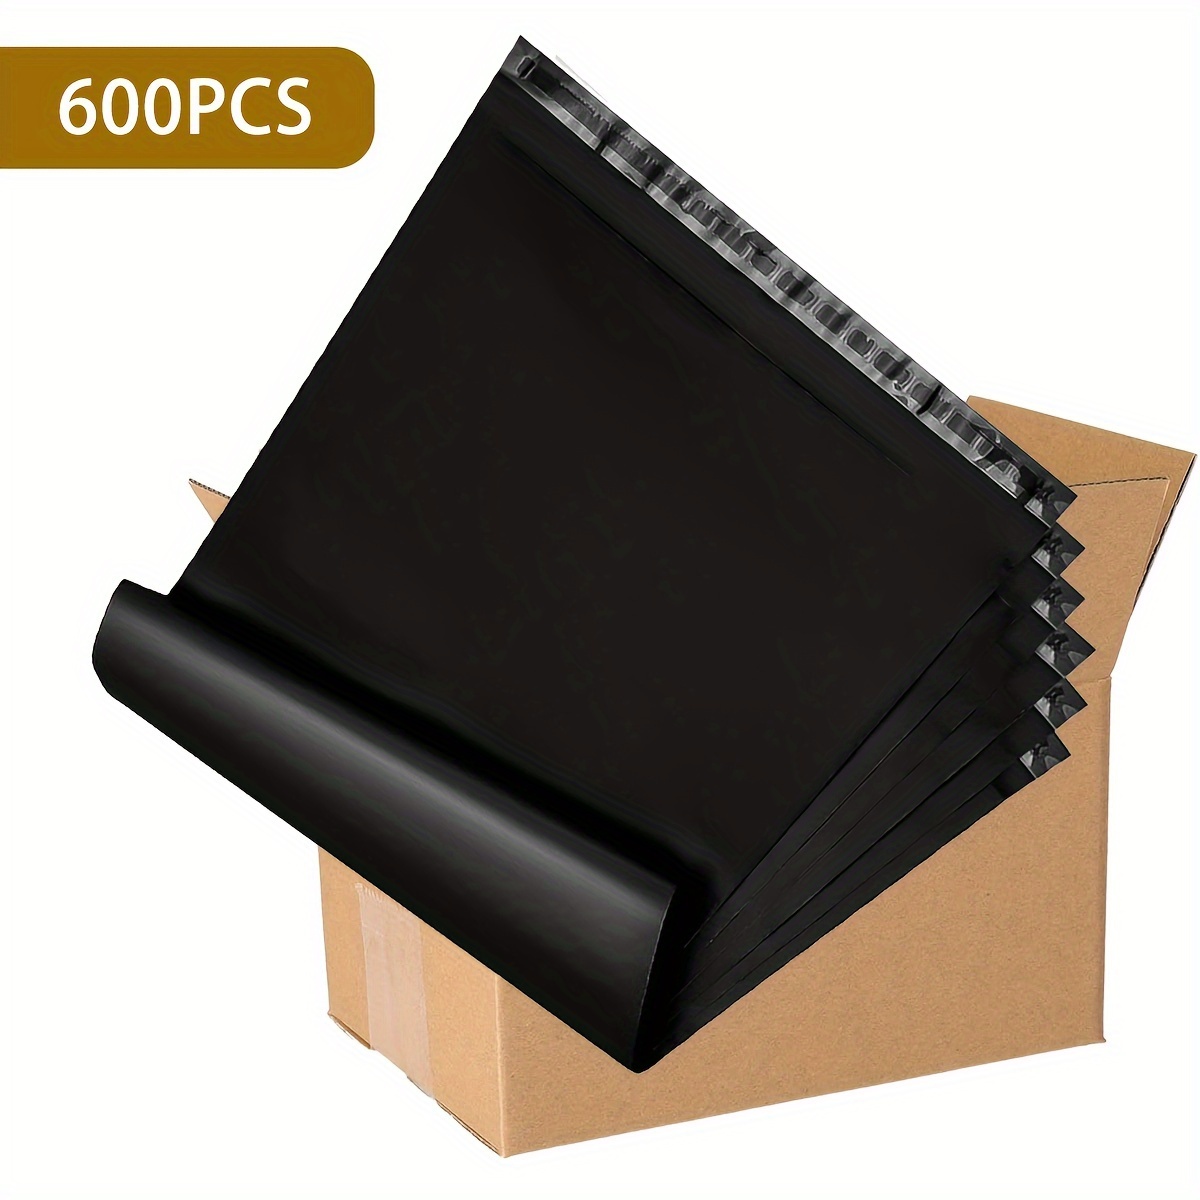 

600 Pcs Black Poly Mailers Shipping Envelopes, 10x13 Inch Self-sealing Envelopes, Boutique Custom Bags, Durability Multipurpose Envelopes, Keep Items Safe & Protected